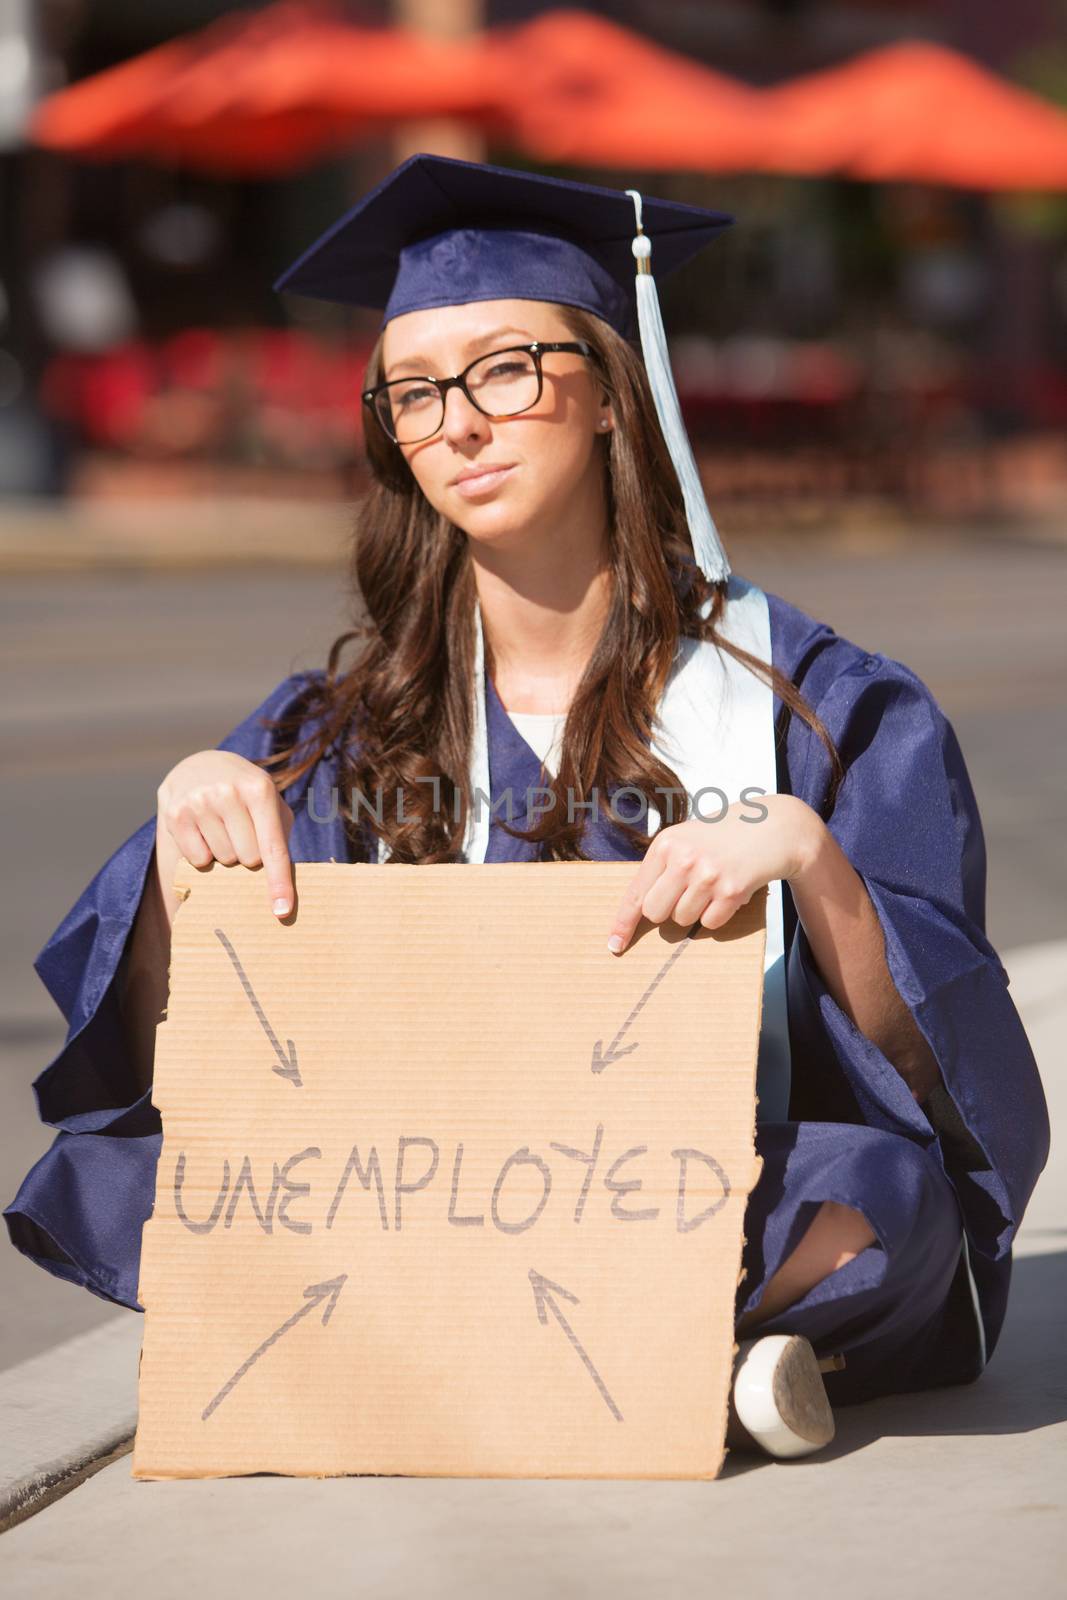 Single unemployed young female graduate sitting with sign